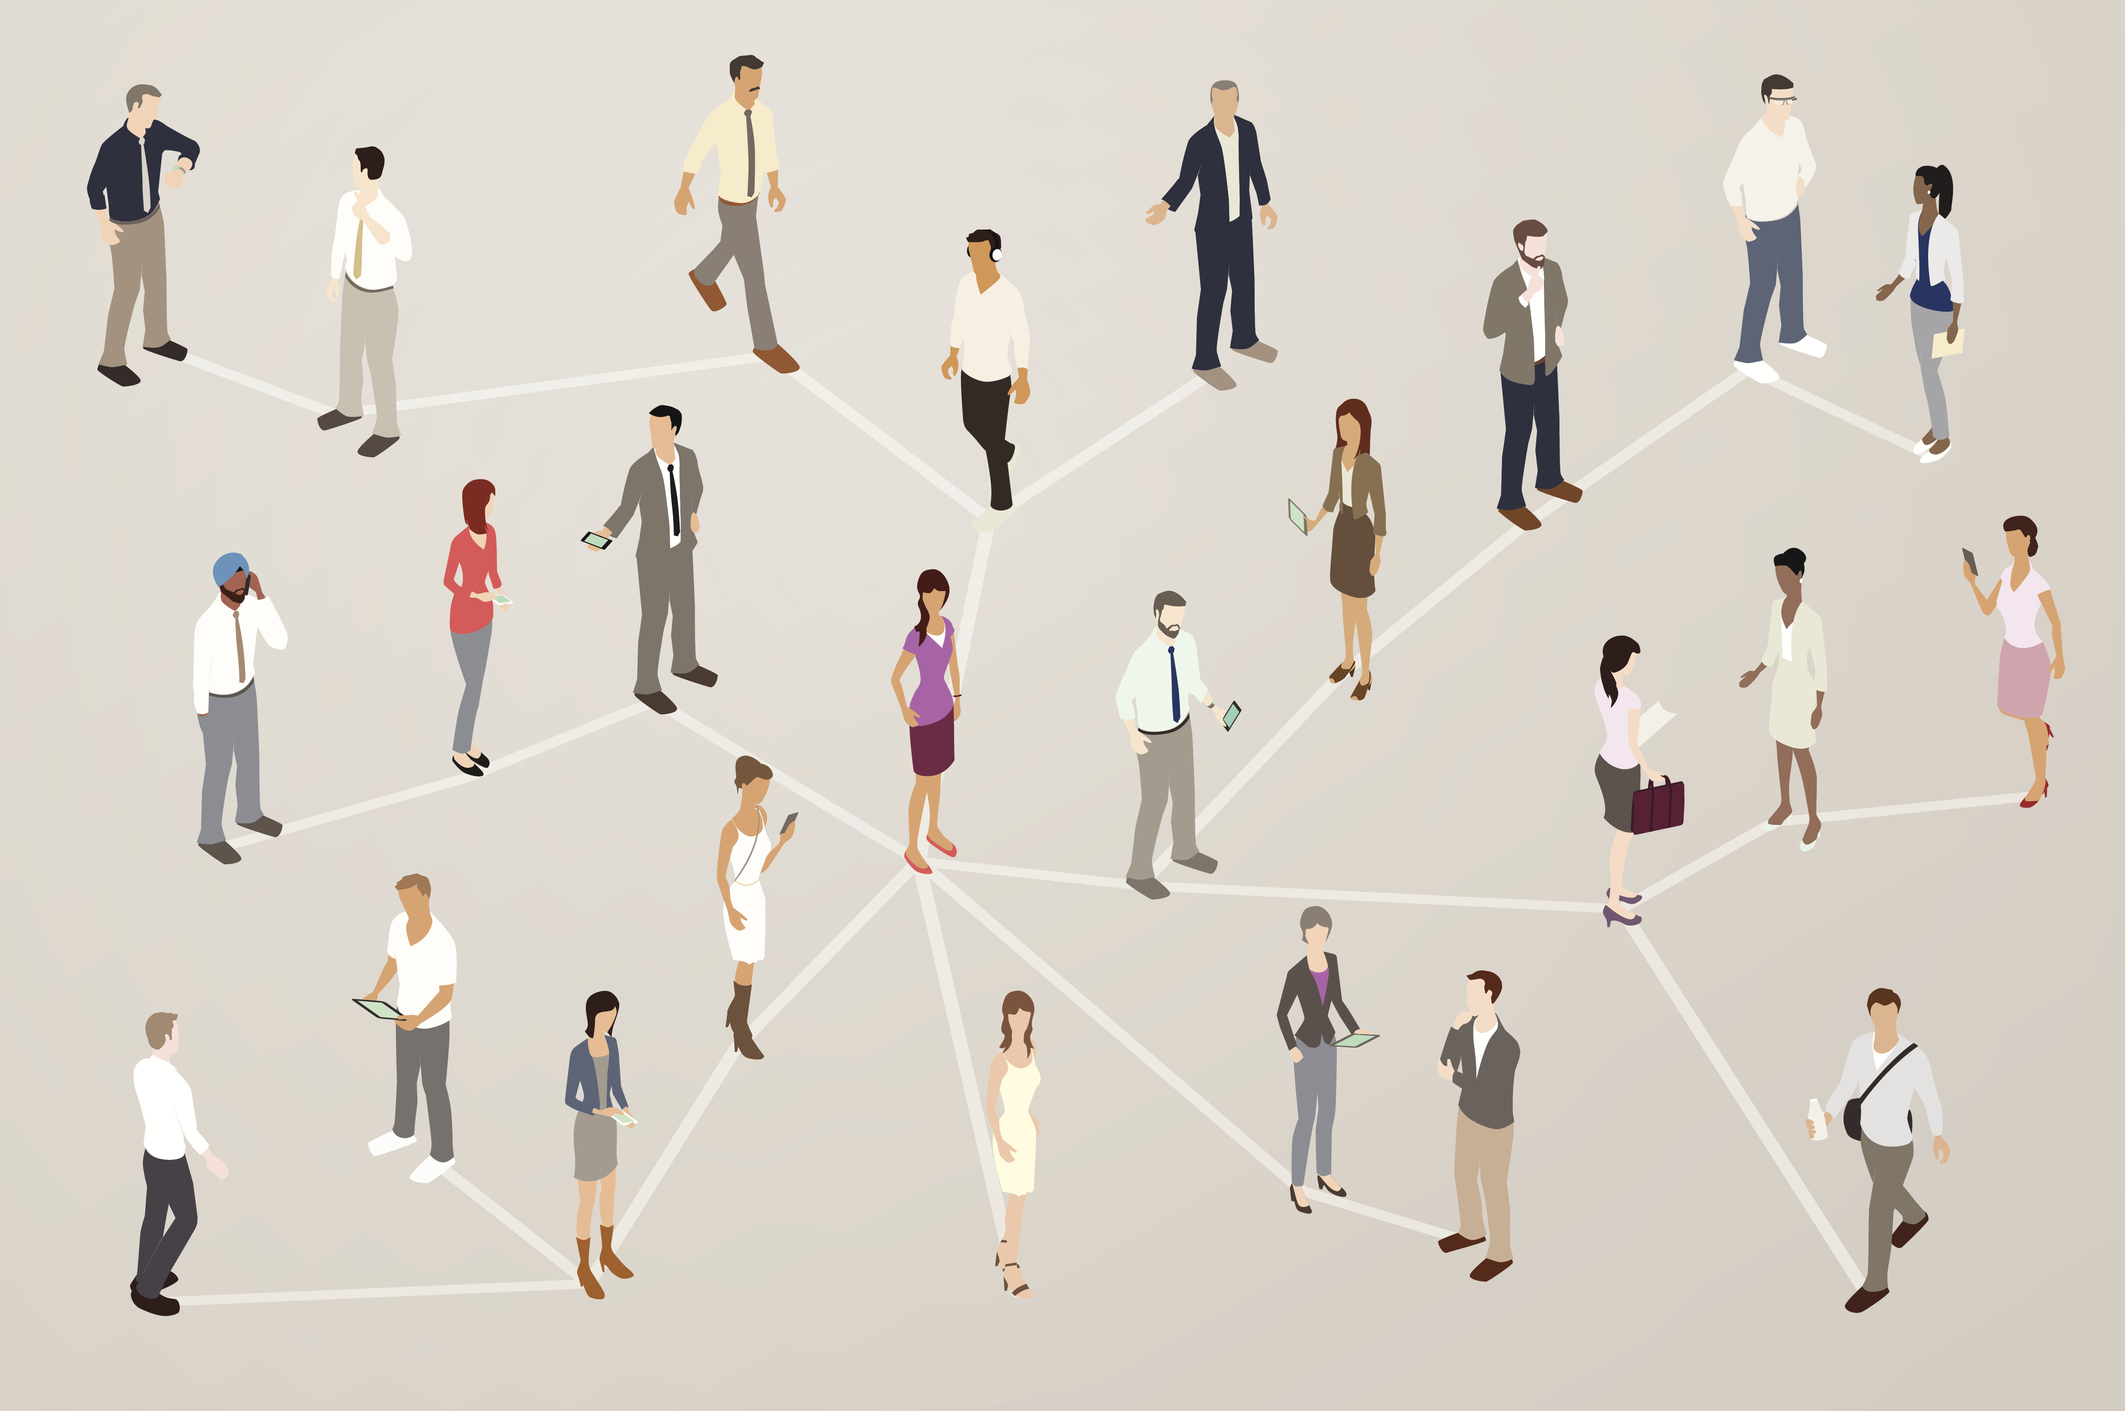 A variety of people stand connected by a network, illustrated in a flat vector style in isometric view. Men and women are dressed for both conservative and casual career work, and can be seen communicating with each other.